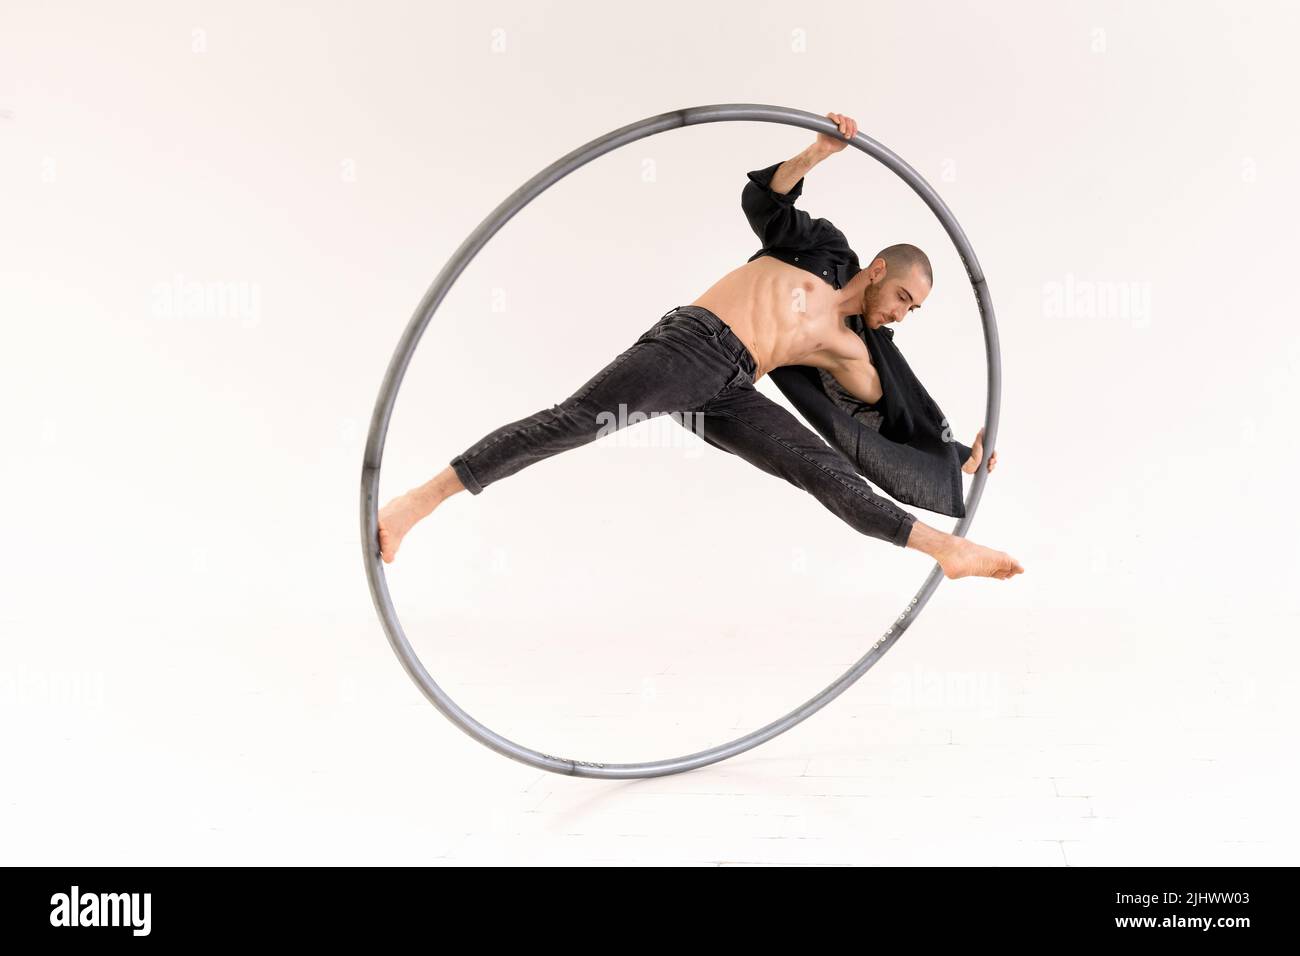 Circus acrobat doing a one leg trick on a spinning cyr wheel isolated on a white background with advertising copyspace Stock Photo